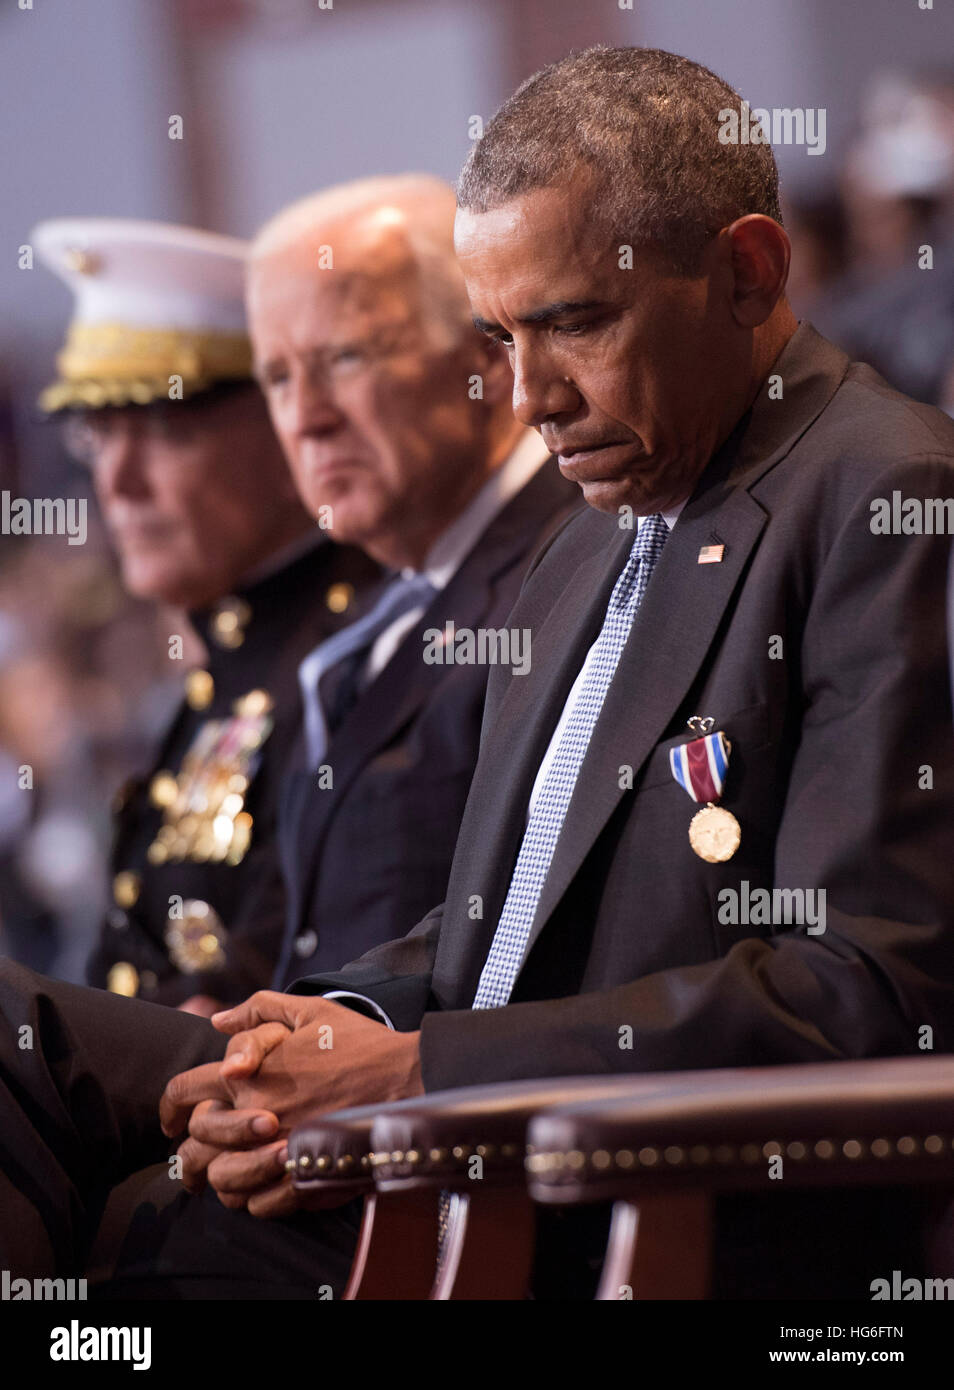 Joint Base Myers-Henderson Hall, Virginia, USA. 4th January, 2017.  United States President Barack Obama (R), Vice President Joe Biden (C) and Chairman of the Joint Chiefs of Staff Gen. Joseph Dunford Jr. attends the Armed Forces Full Honor Review Farewell Ceremony for President Obama at Joint Base Myers-Henderson Hall, in Virginia on January 4, 2017. The five braces of the military honored the president and vice-president for their service as they conclude their final term in office. Credit: MediaPunch Inc/Alamy Live News Stock Photo